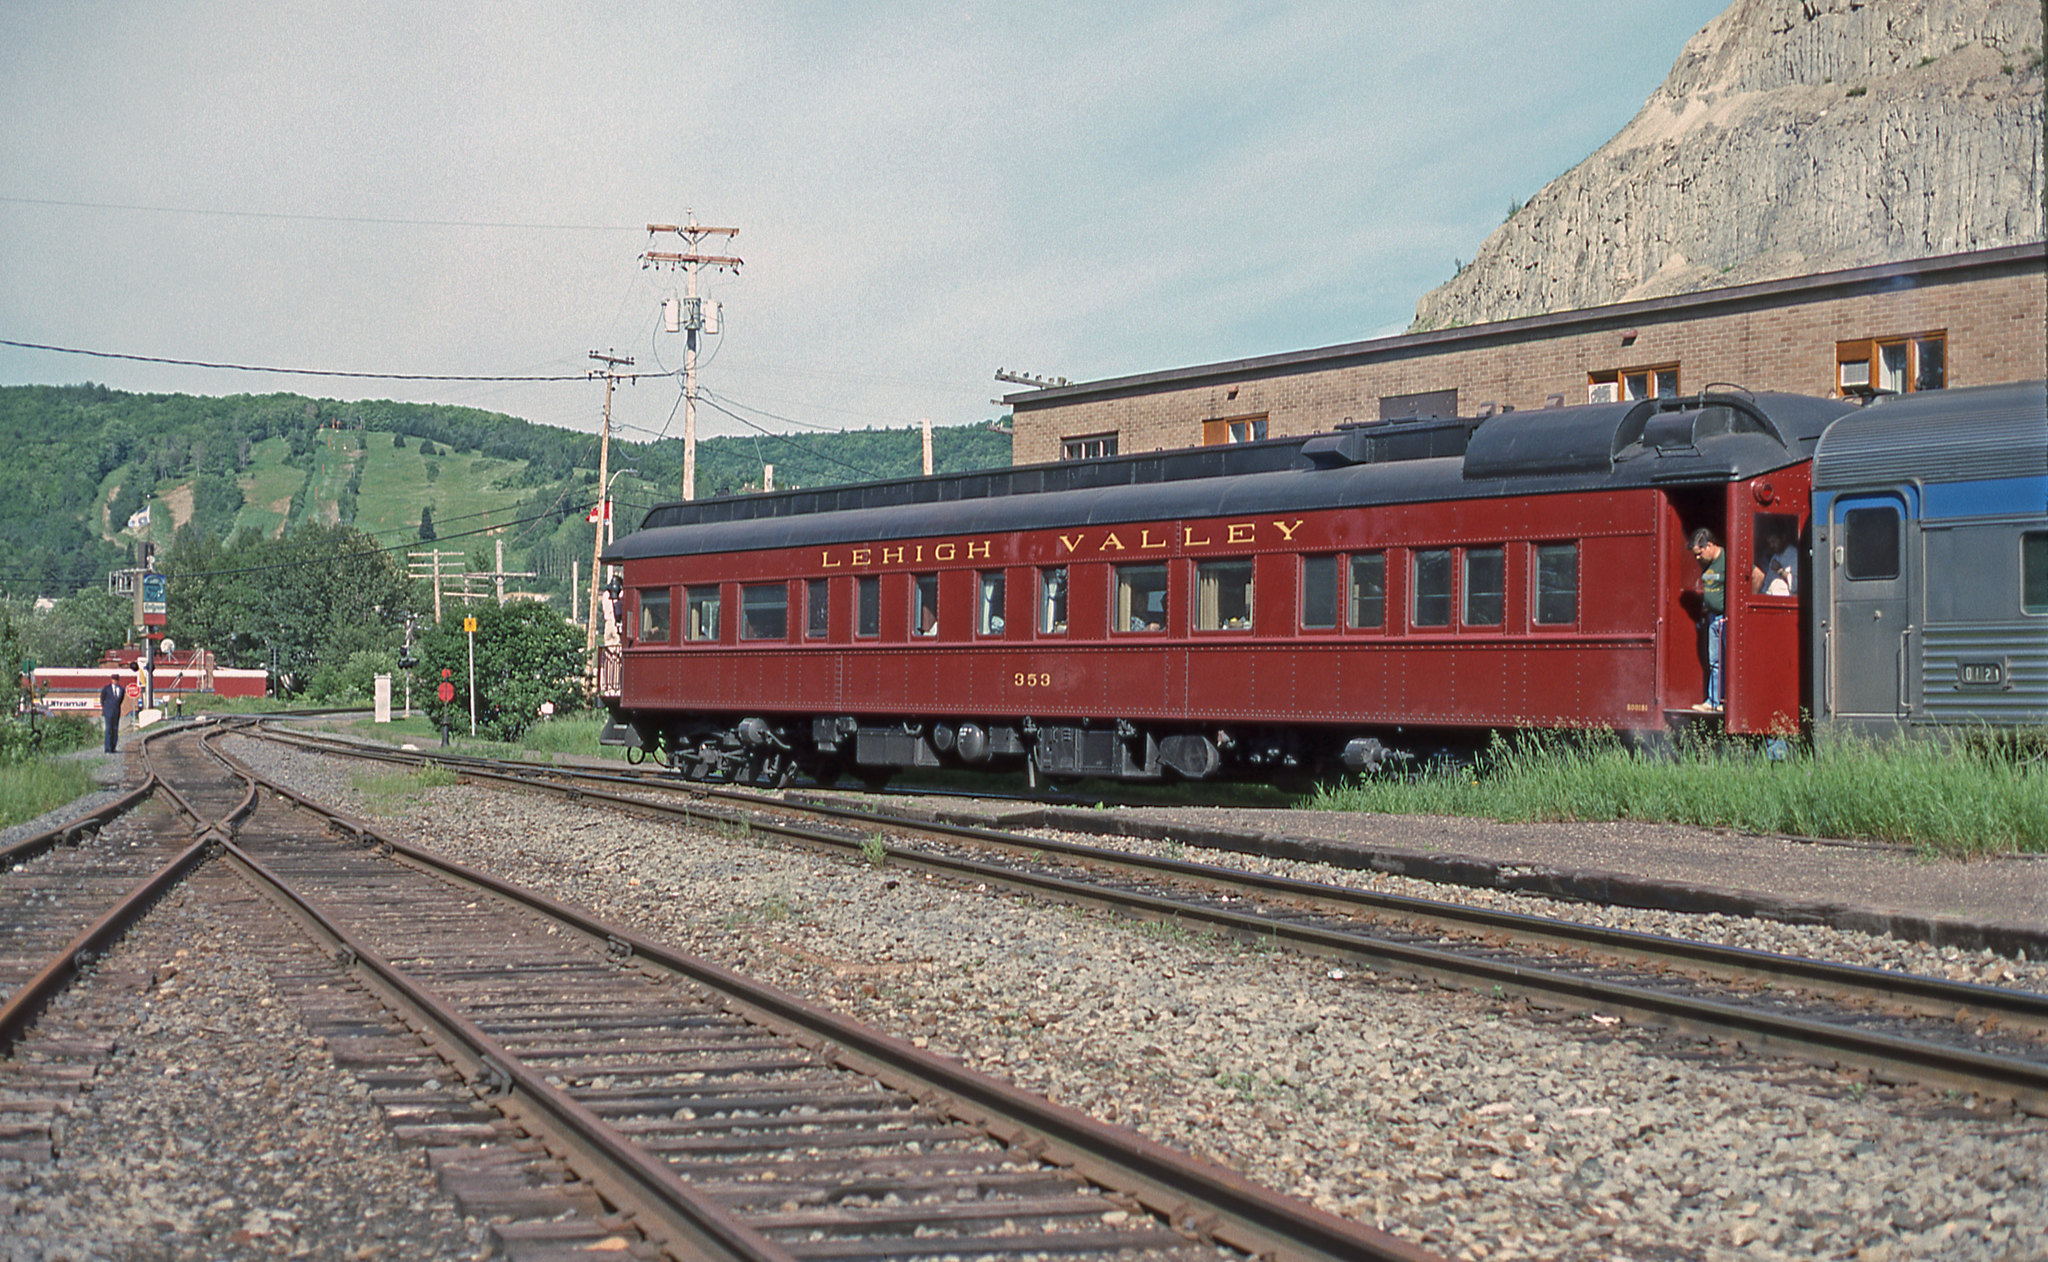 Lehigh Valley 353 Black Diamond on VIA # 16, the Chaleur.

Note that the flag is out on the left.

Matapedia, Quebec.
Sunday, July 1, 1990.